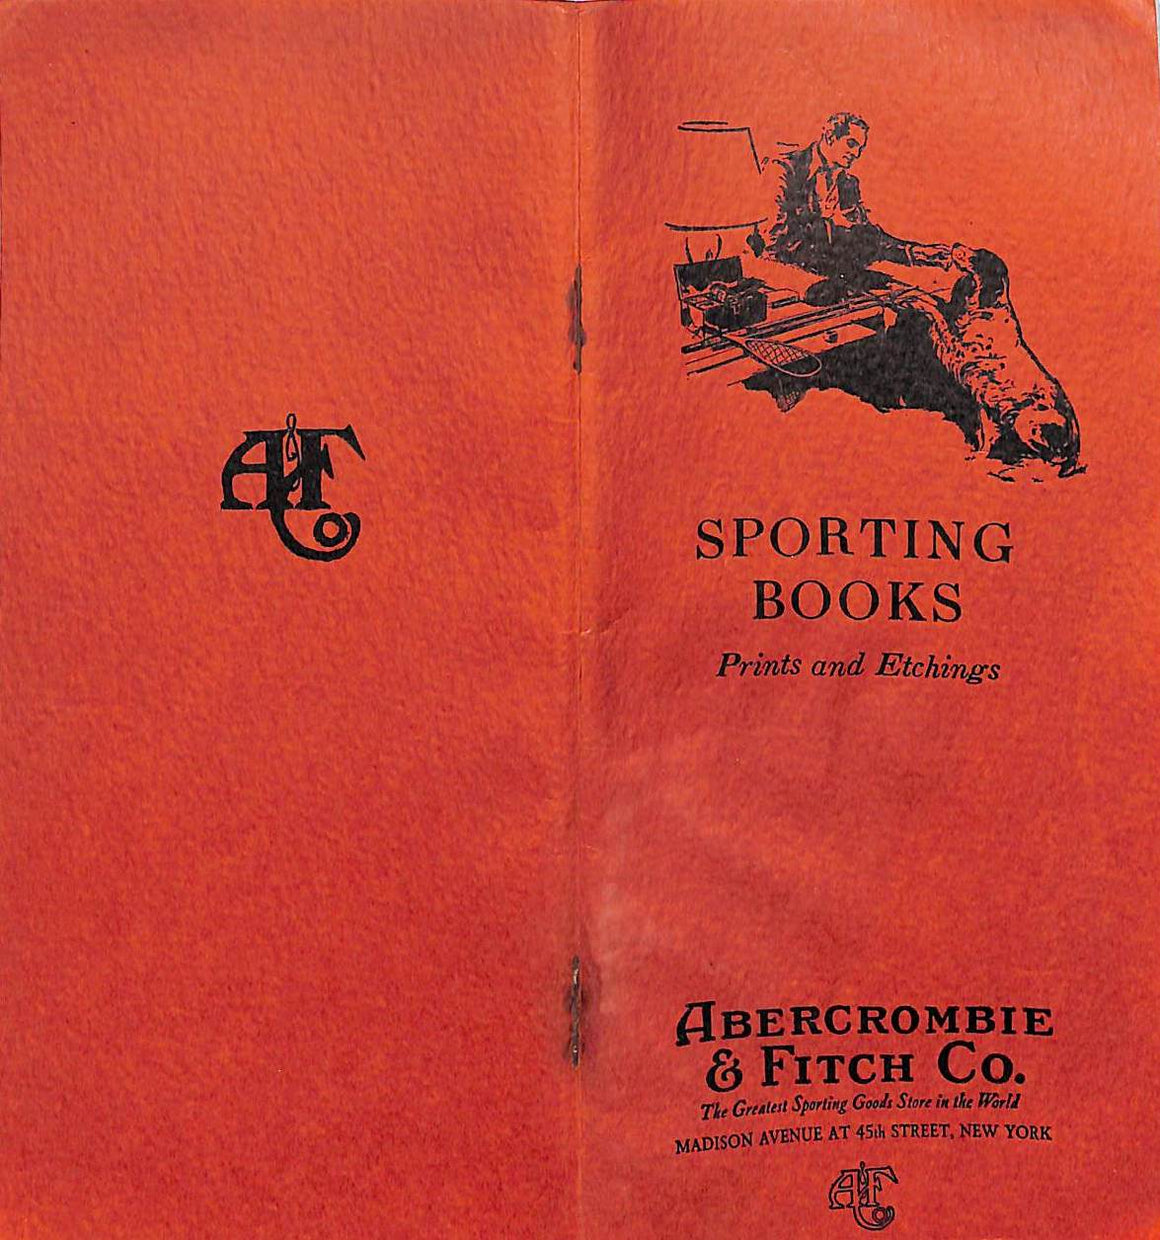 Abercrombie & Fitch Sporting Books c1935 Catalog